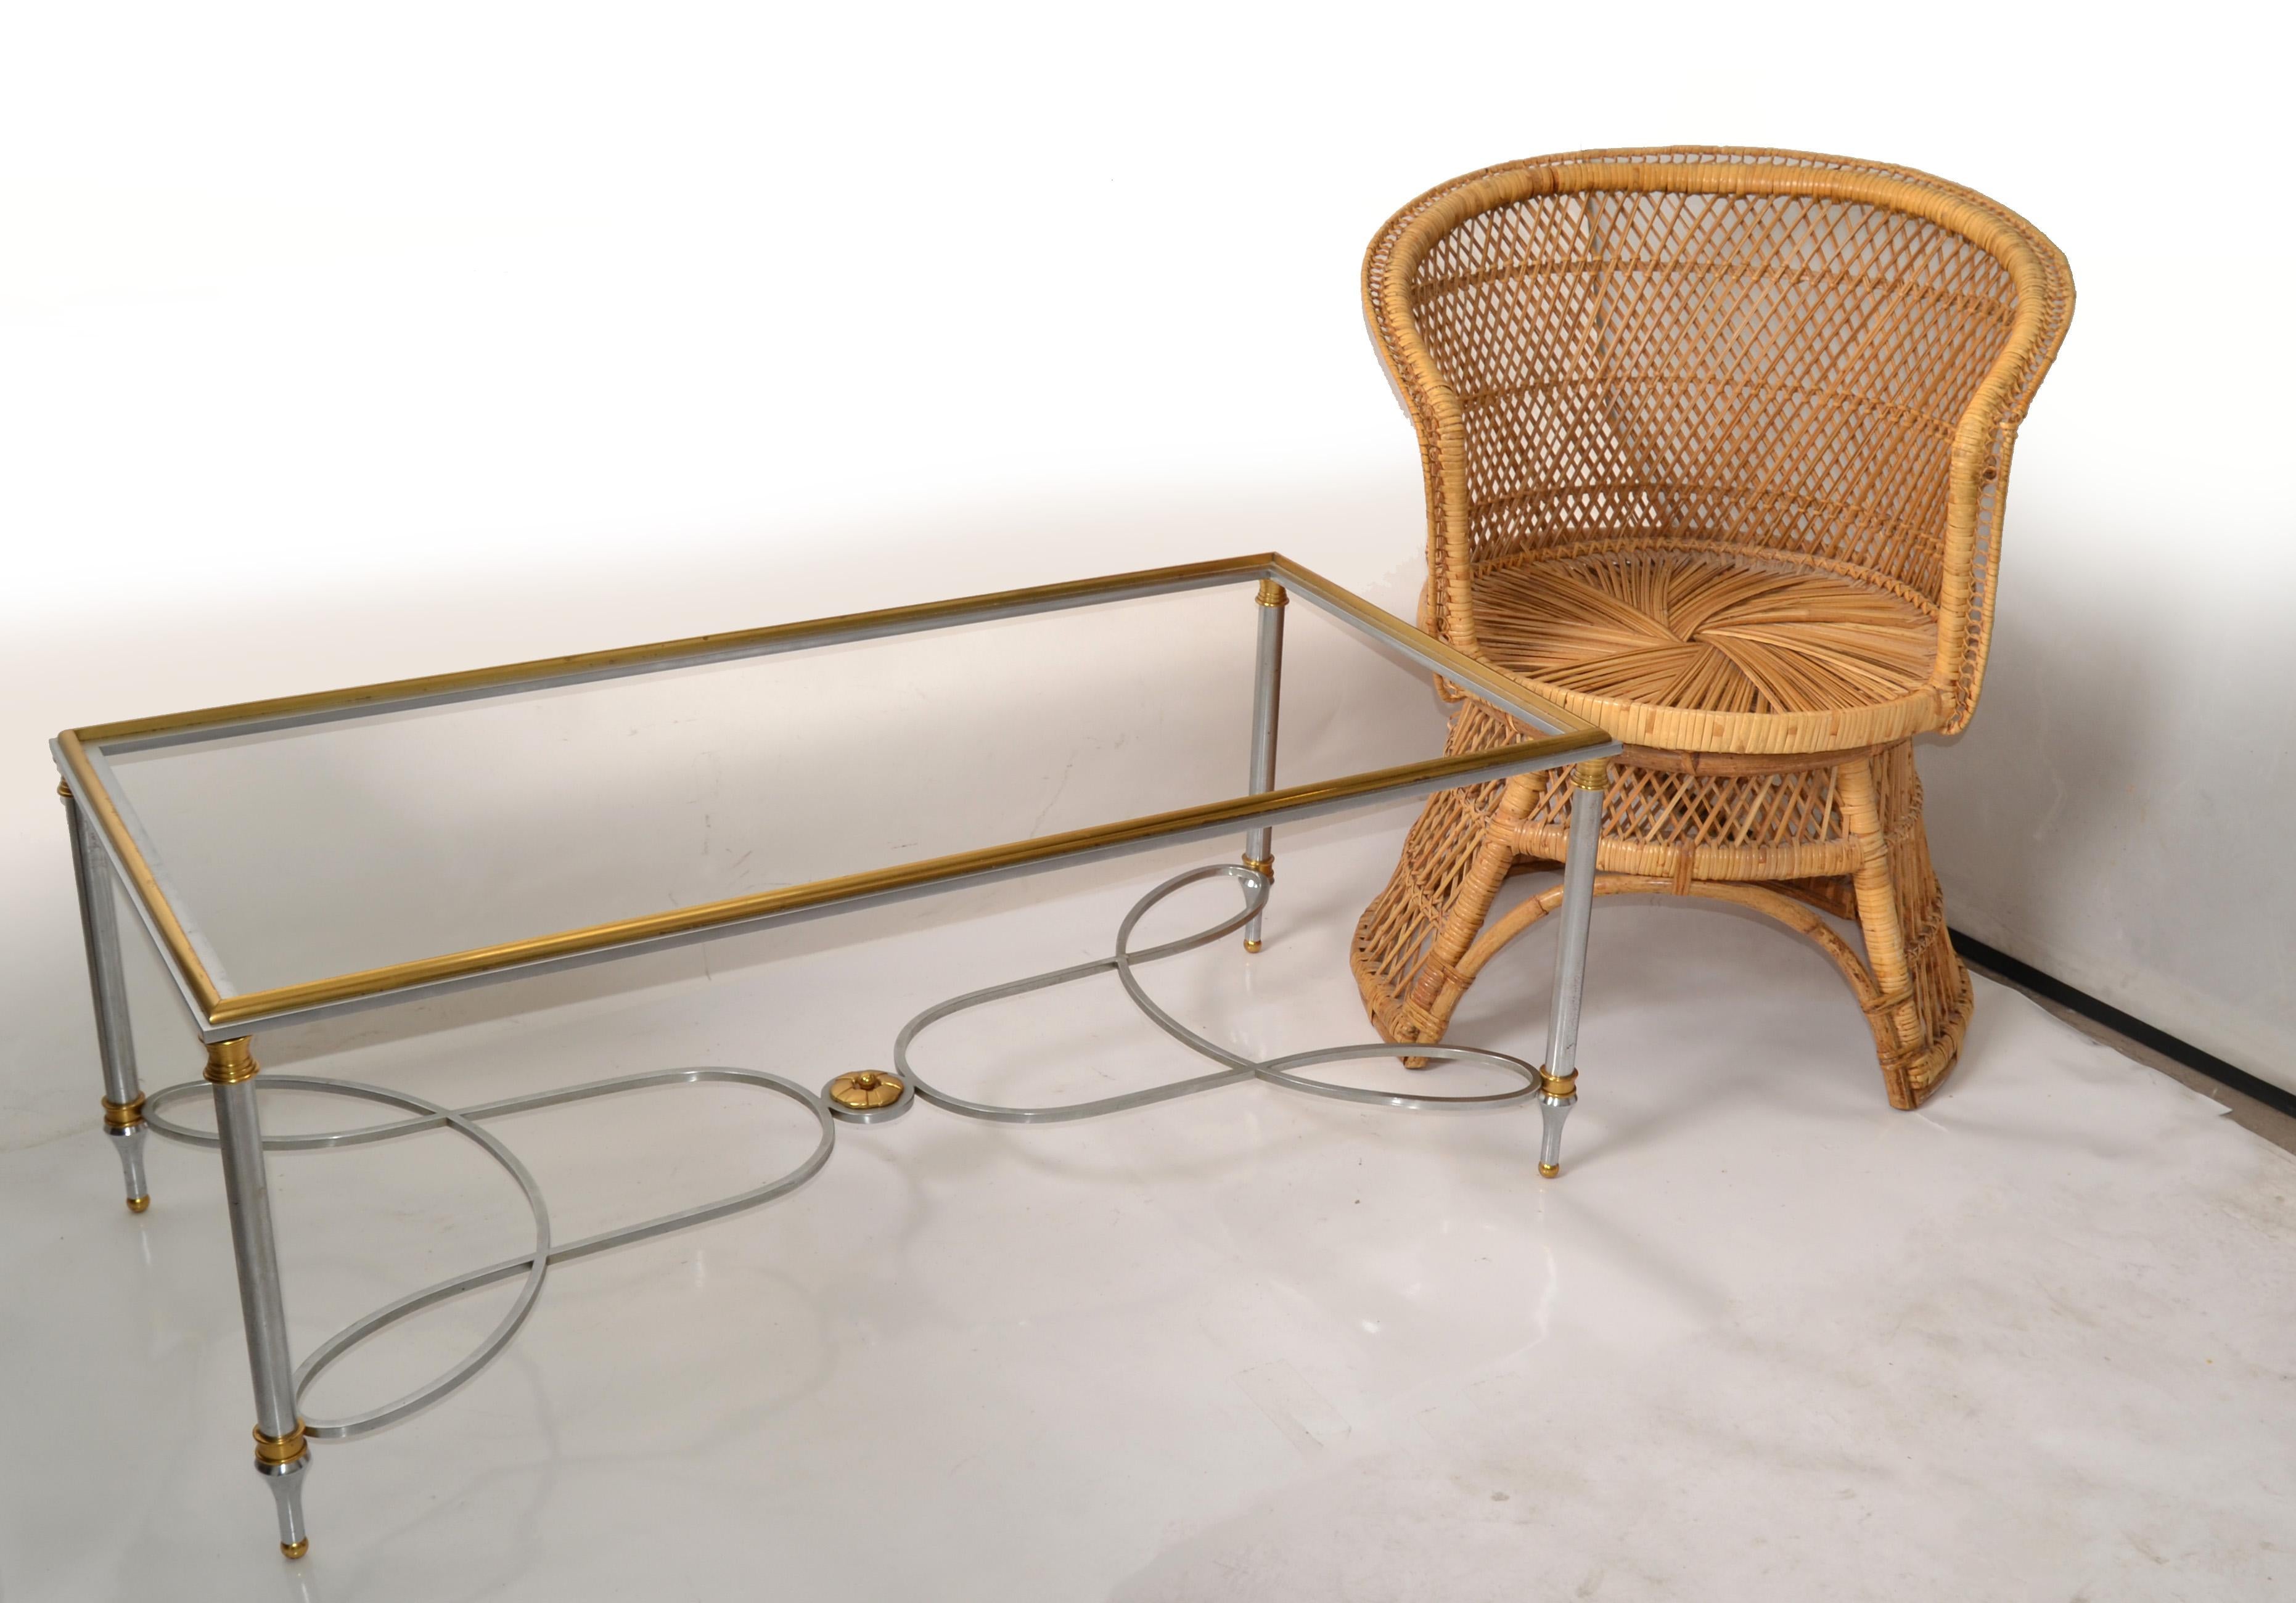 1970s Maison Charles French Steel Brass Glass Coffee Table Mid-Century Modern  For Sale 1